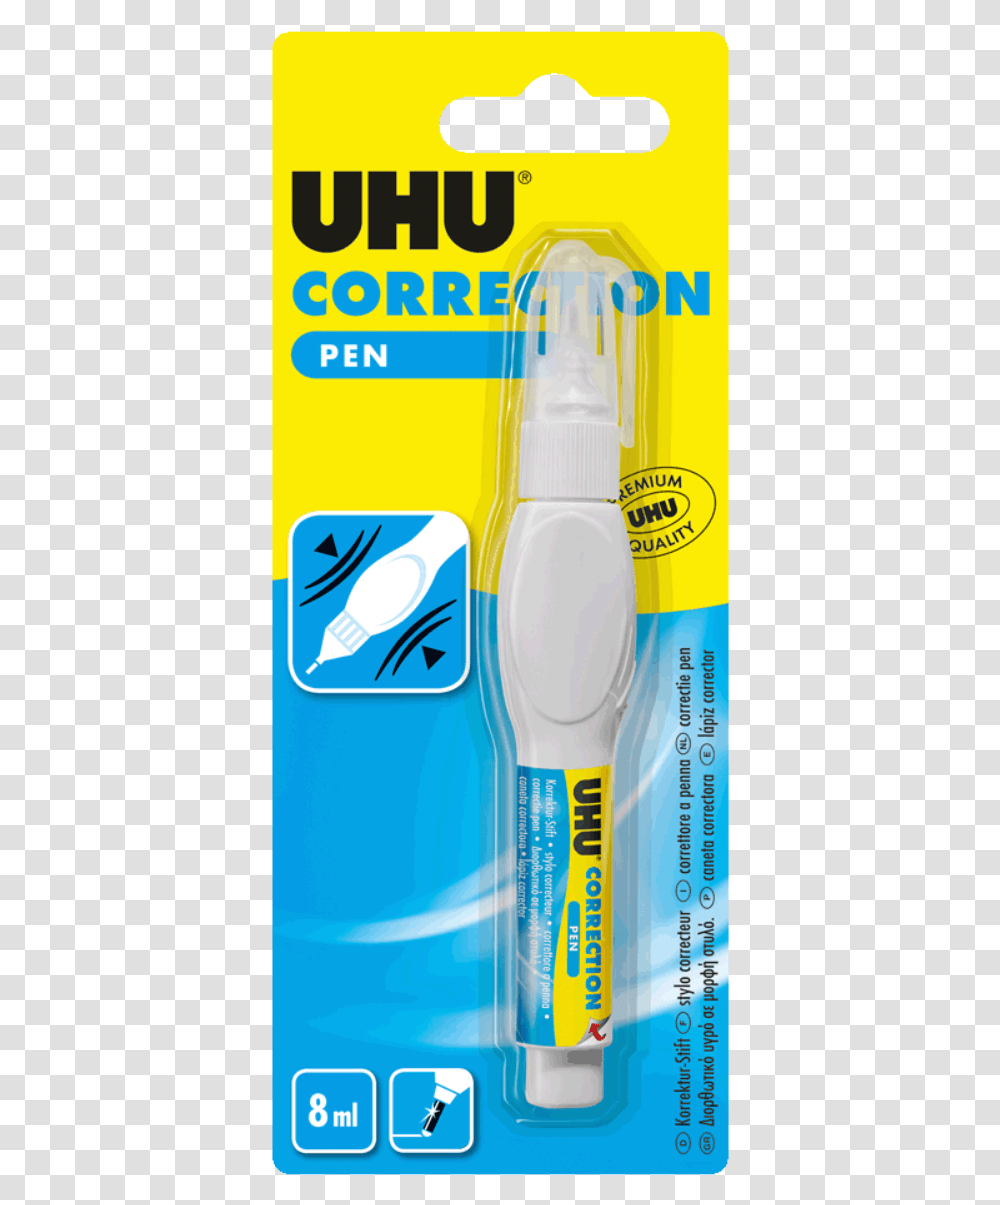 Correction Pen Uhu, Bottle, Cosmetics, Sunscreen, Toothpaste Transparent Png